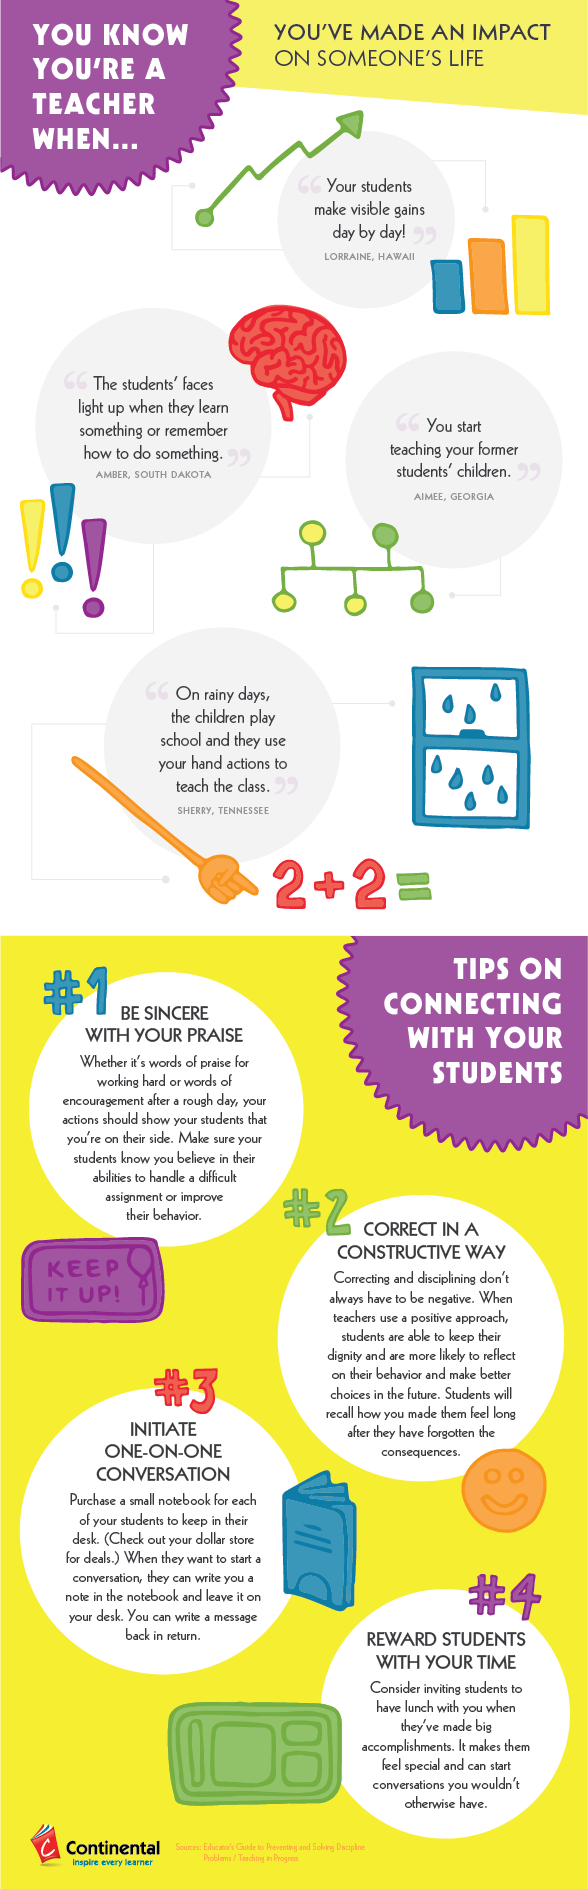 You Know You're a Teacher When...You've Made An Impact infrographic